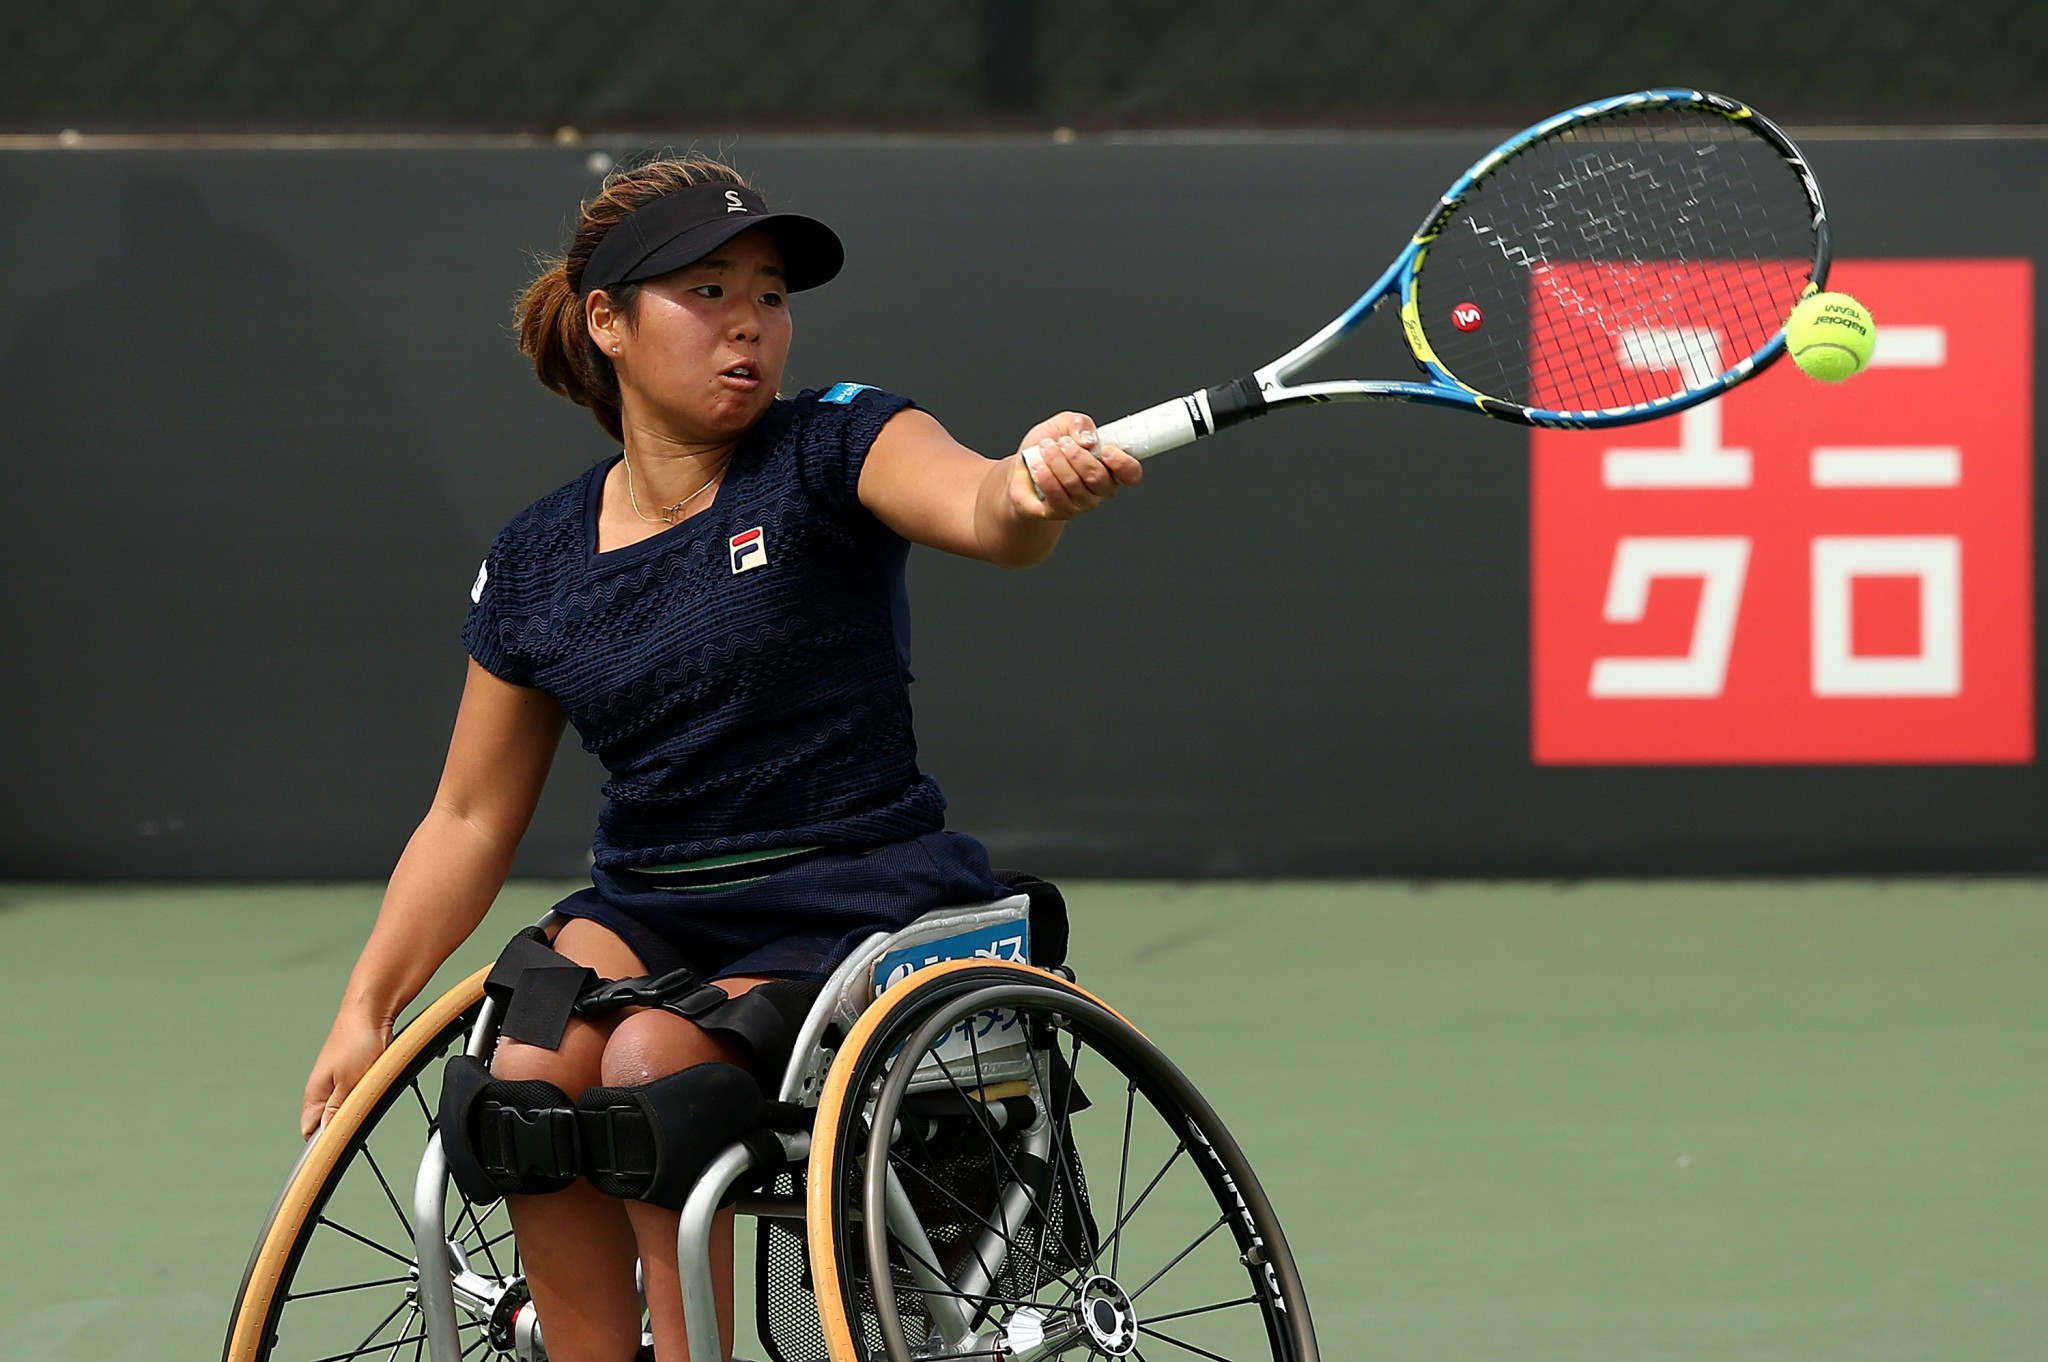 Japan's Yui Kamiji is the only non-Dutch player in the women's singles semi-finals ©Getty Images